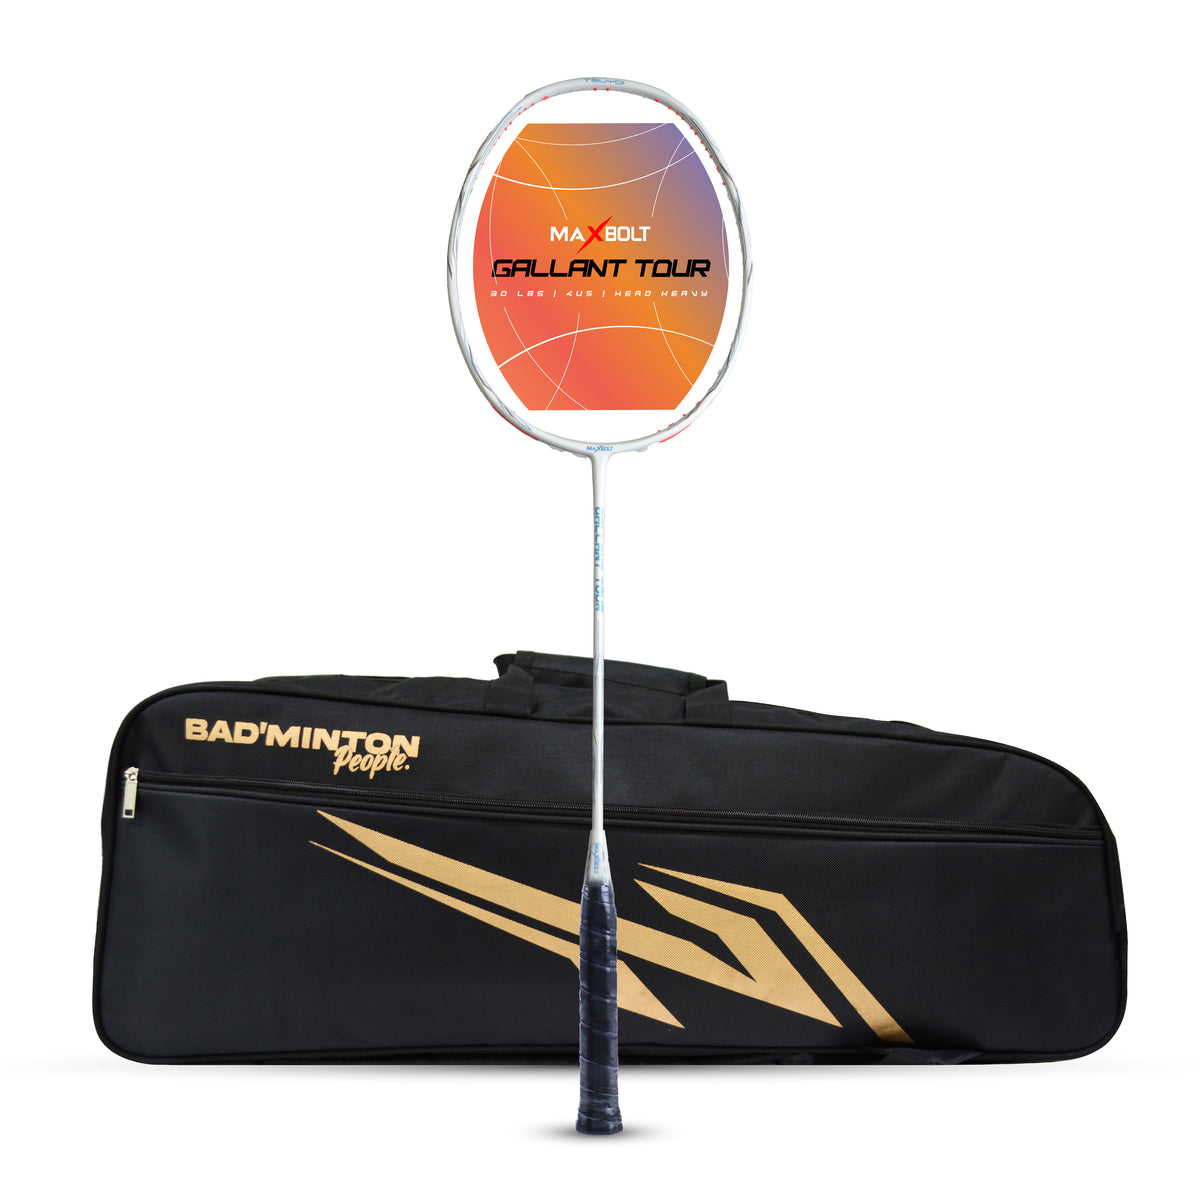 Maxbolt Gallant Tour - buy badminton rackets online at best price ...